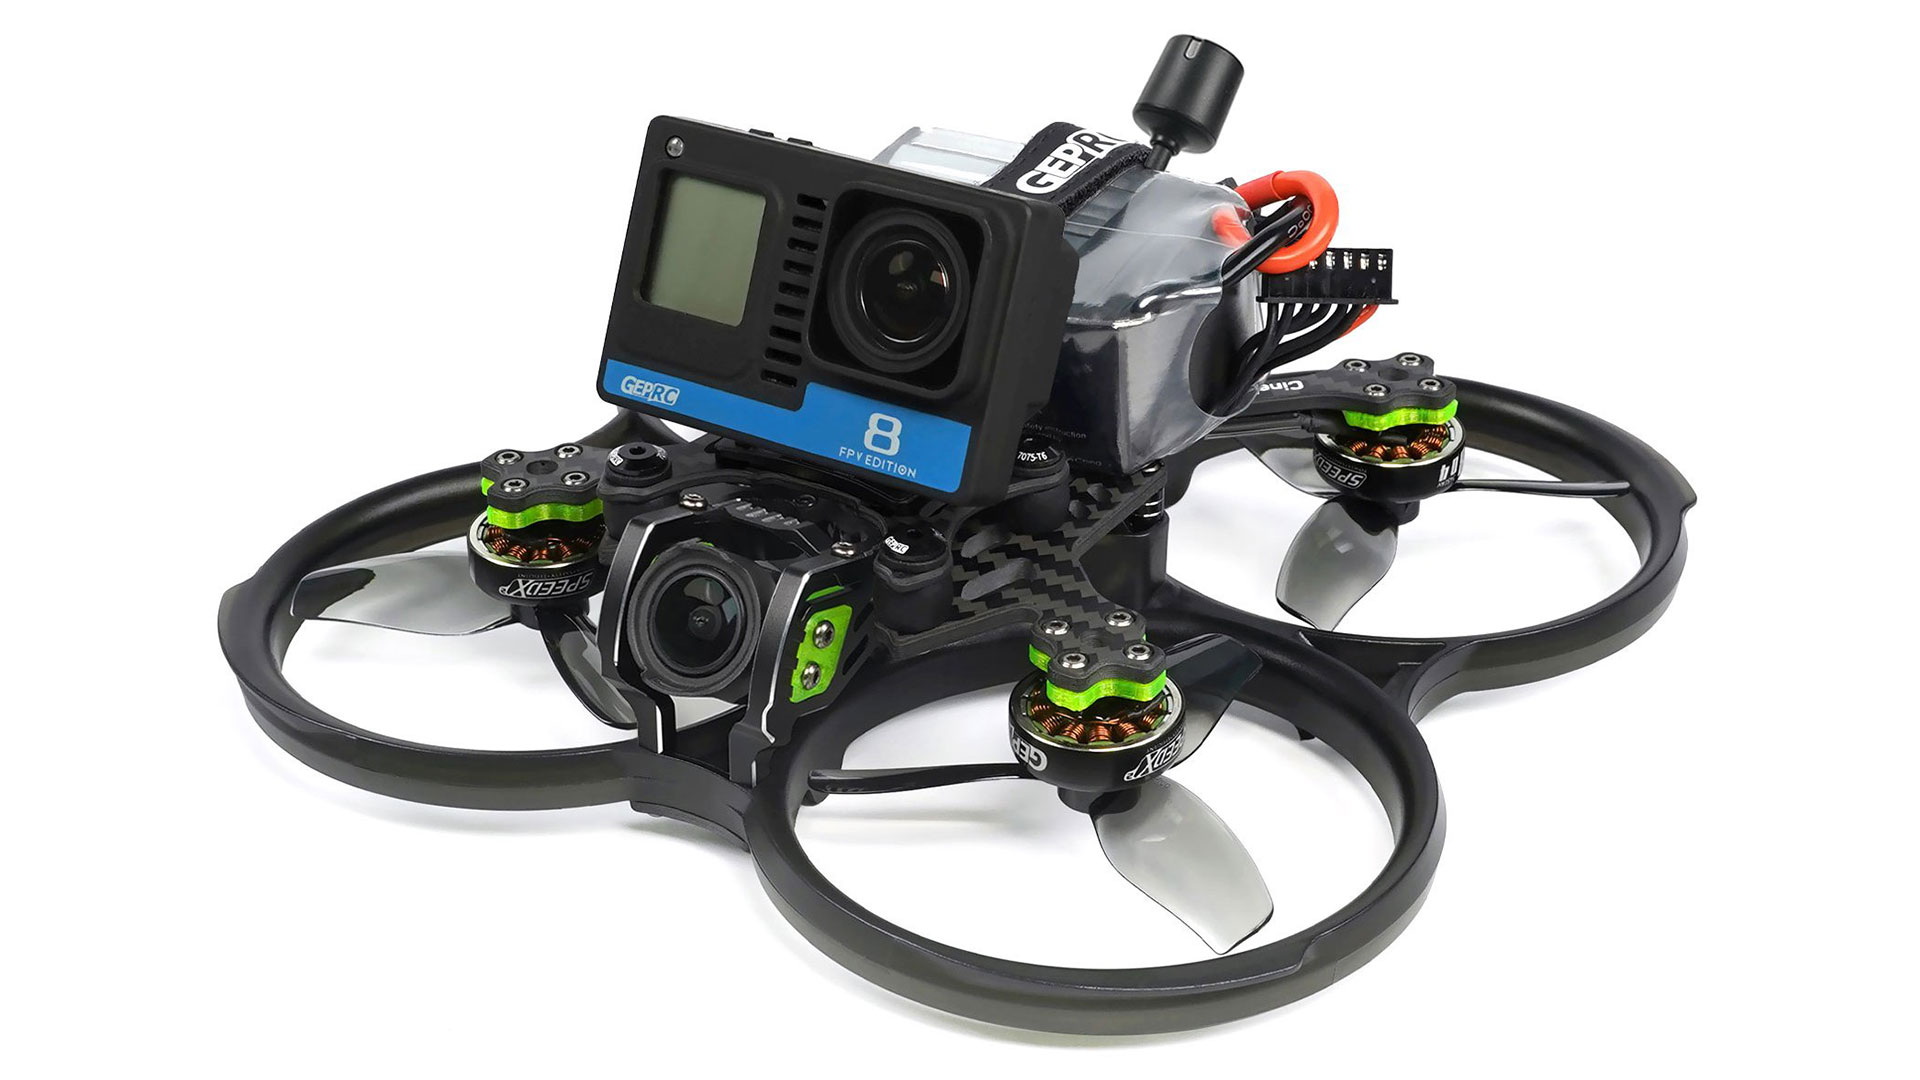 GEPRC Cinebot30 - 3-Inch FPV Drone with DJI O3 Air Unit and